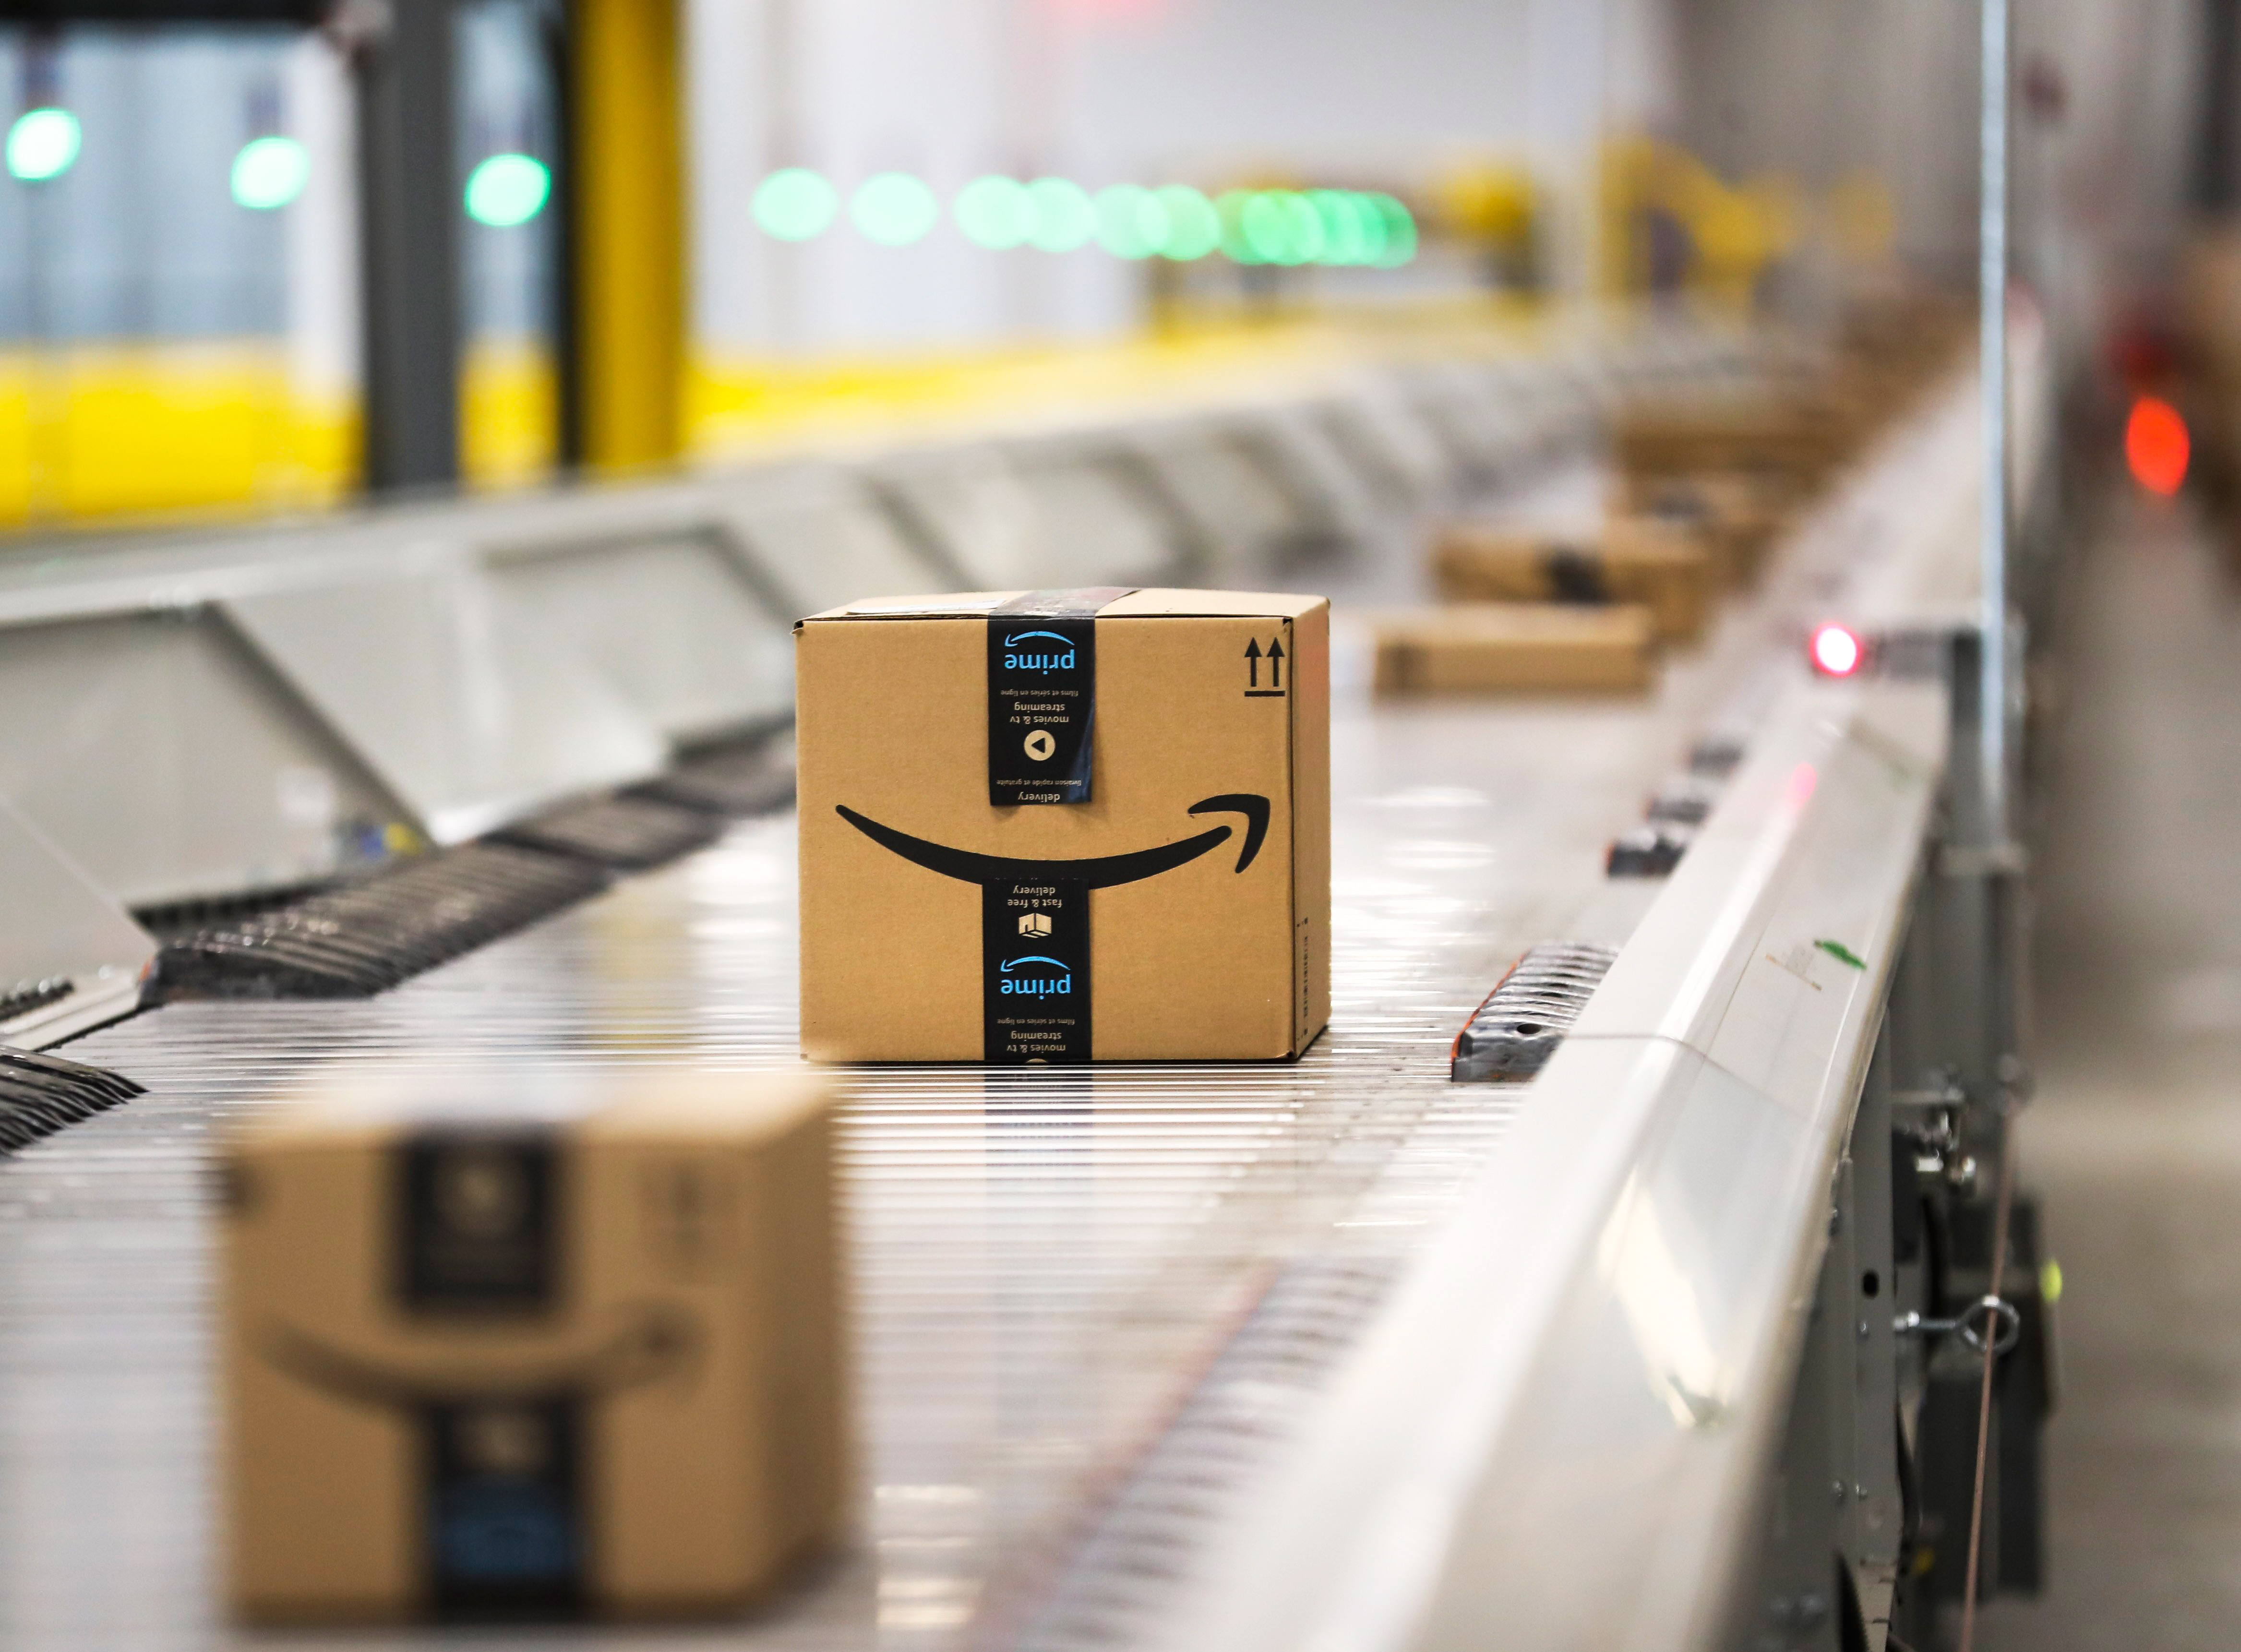 Amazon-branded shipping boxes go down a conveyor belt.